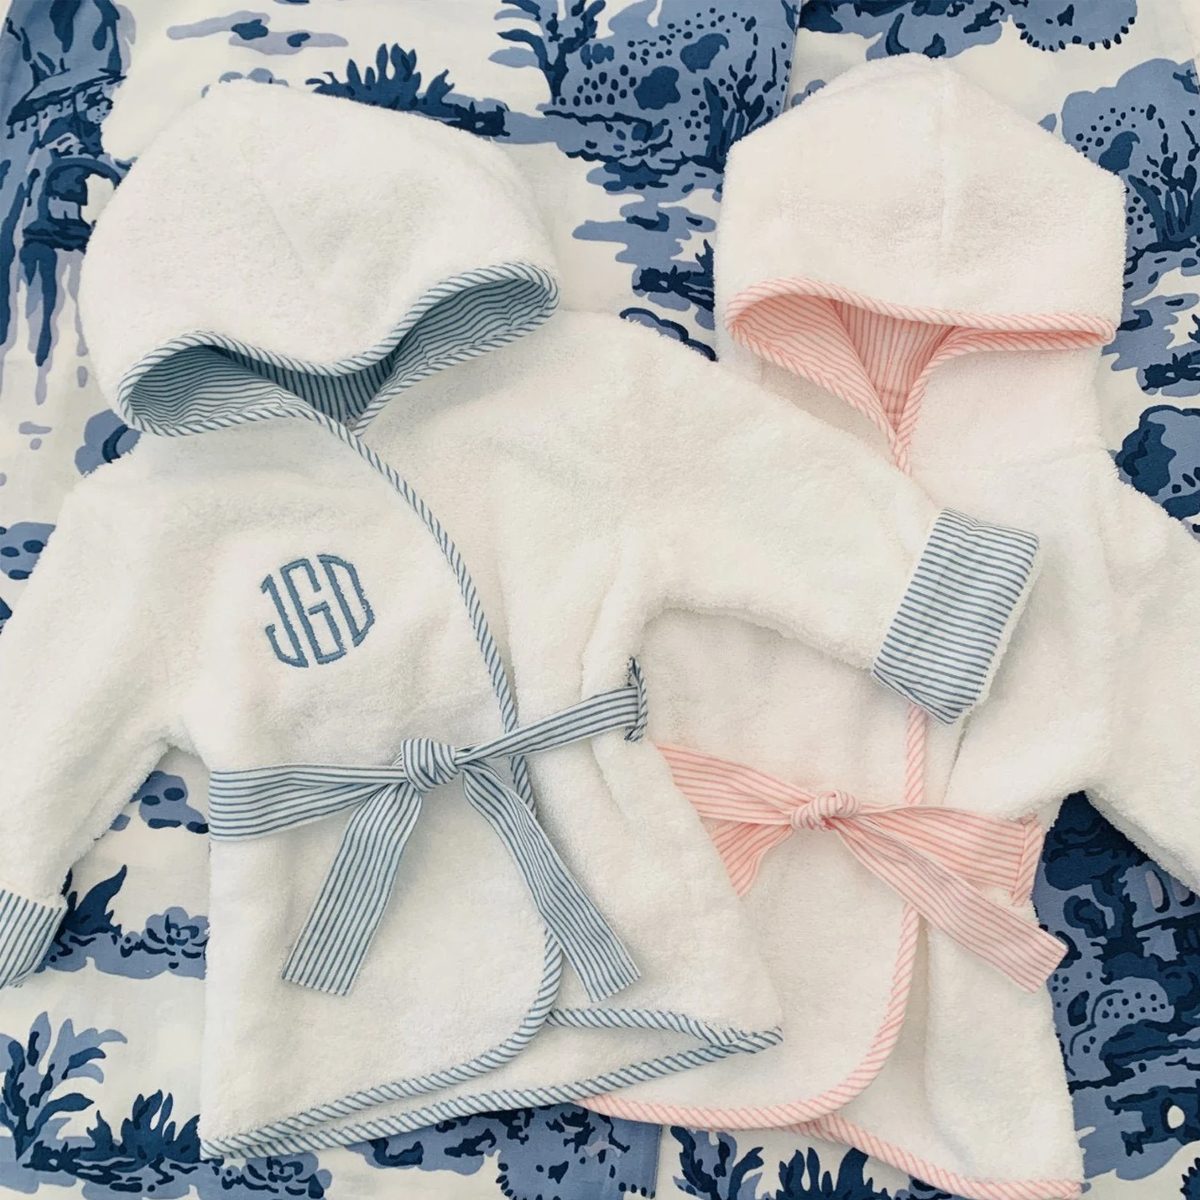 <p>New parents will love this embroidered <a href="https://www.etsy.com/listing/785665213/monogrammed-infant-robe" rel="noreferrer noopener">bathrobe</a> for babies from the Etsy shop of Claire Jayne Designs, and you'll love how easy it is to personalize with initials. If you're buying it ahead of the baby's birth and don't yet know the first name, you can have it embroidered with the last initial as a special touch. The best part? It's one of the rare <a href="https://www.rd.com/list/personalized-gifts/" rel="noopener noreferrer">personalized gifts</a> that looks expensive but fits within most modest budgets.</p> <p class="listicle-page__cta-button-shop"><a class="shop-btn" href="https://www.etsy.com/listing/785665213/monogrammed-infant-robe">Shop Now</a></p>